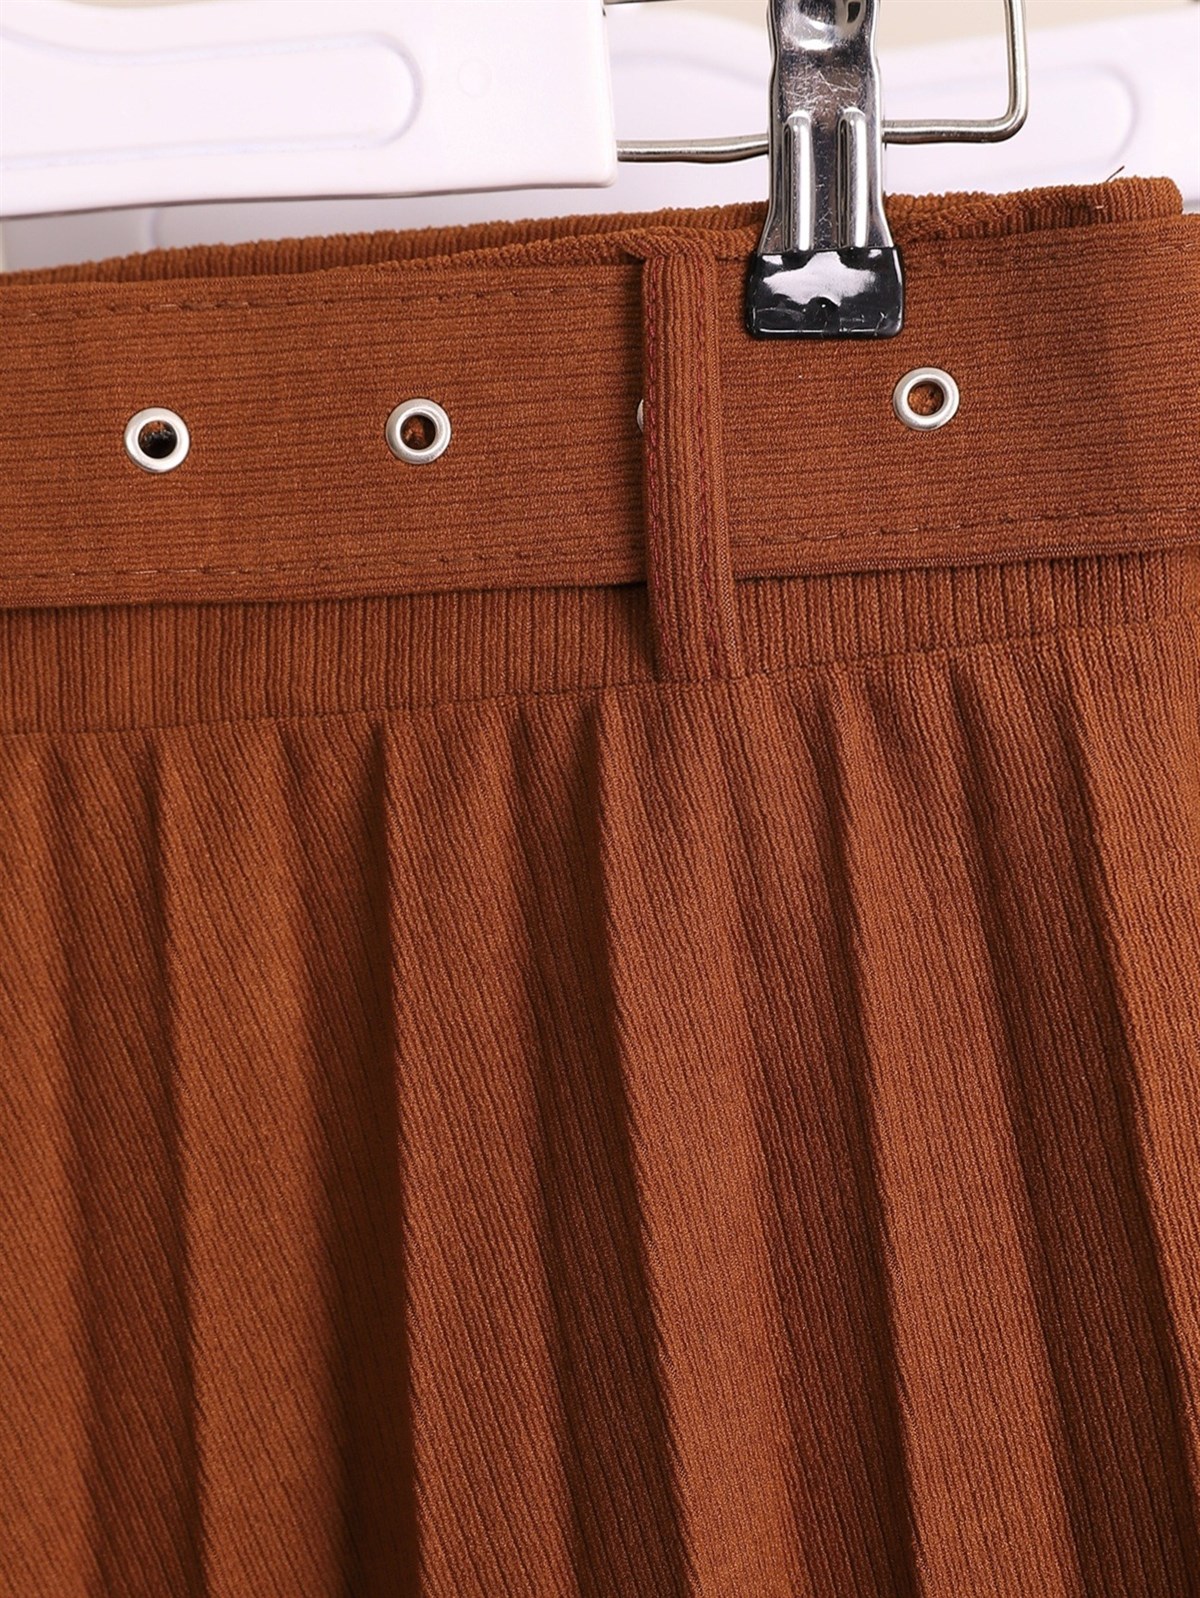 pleated skirt outfithijab